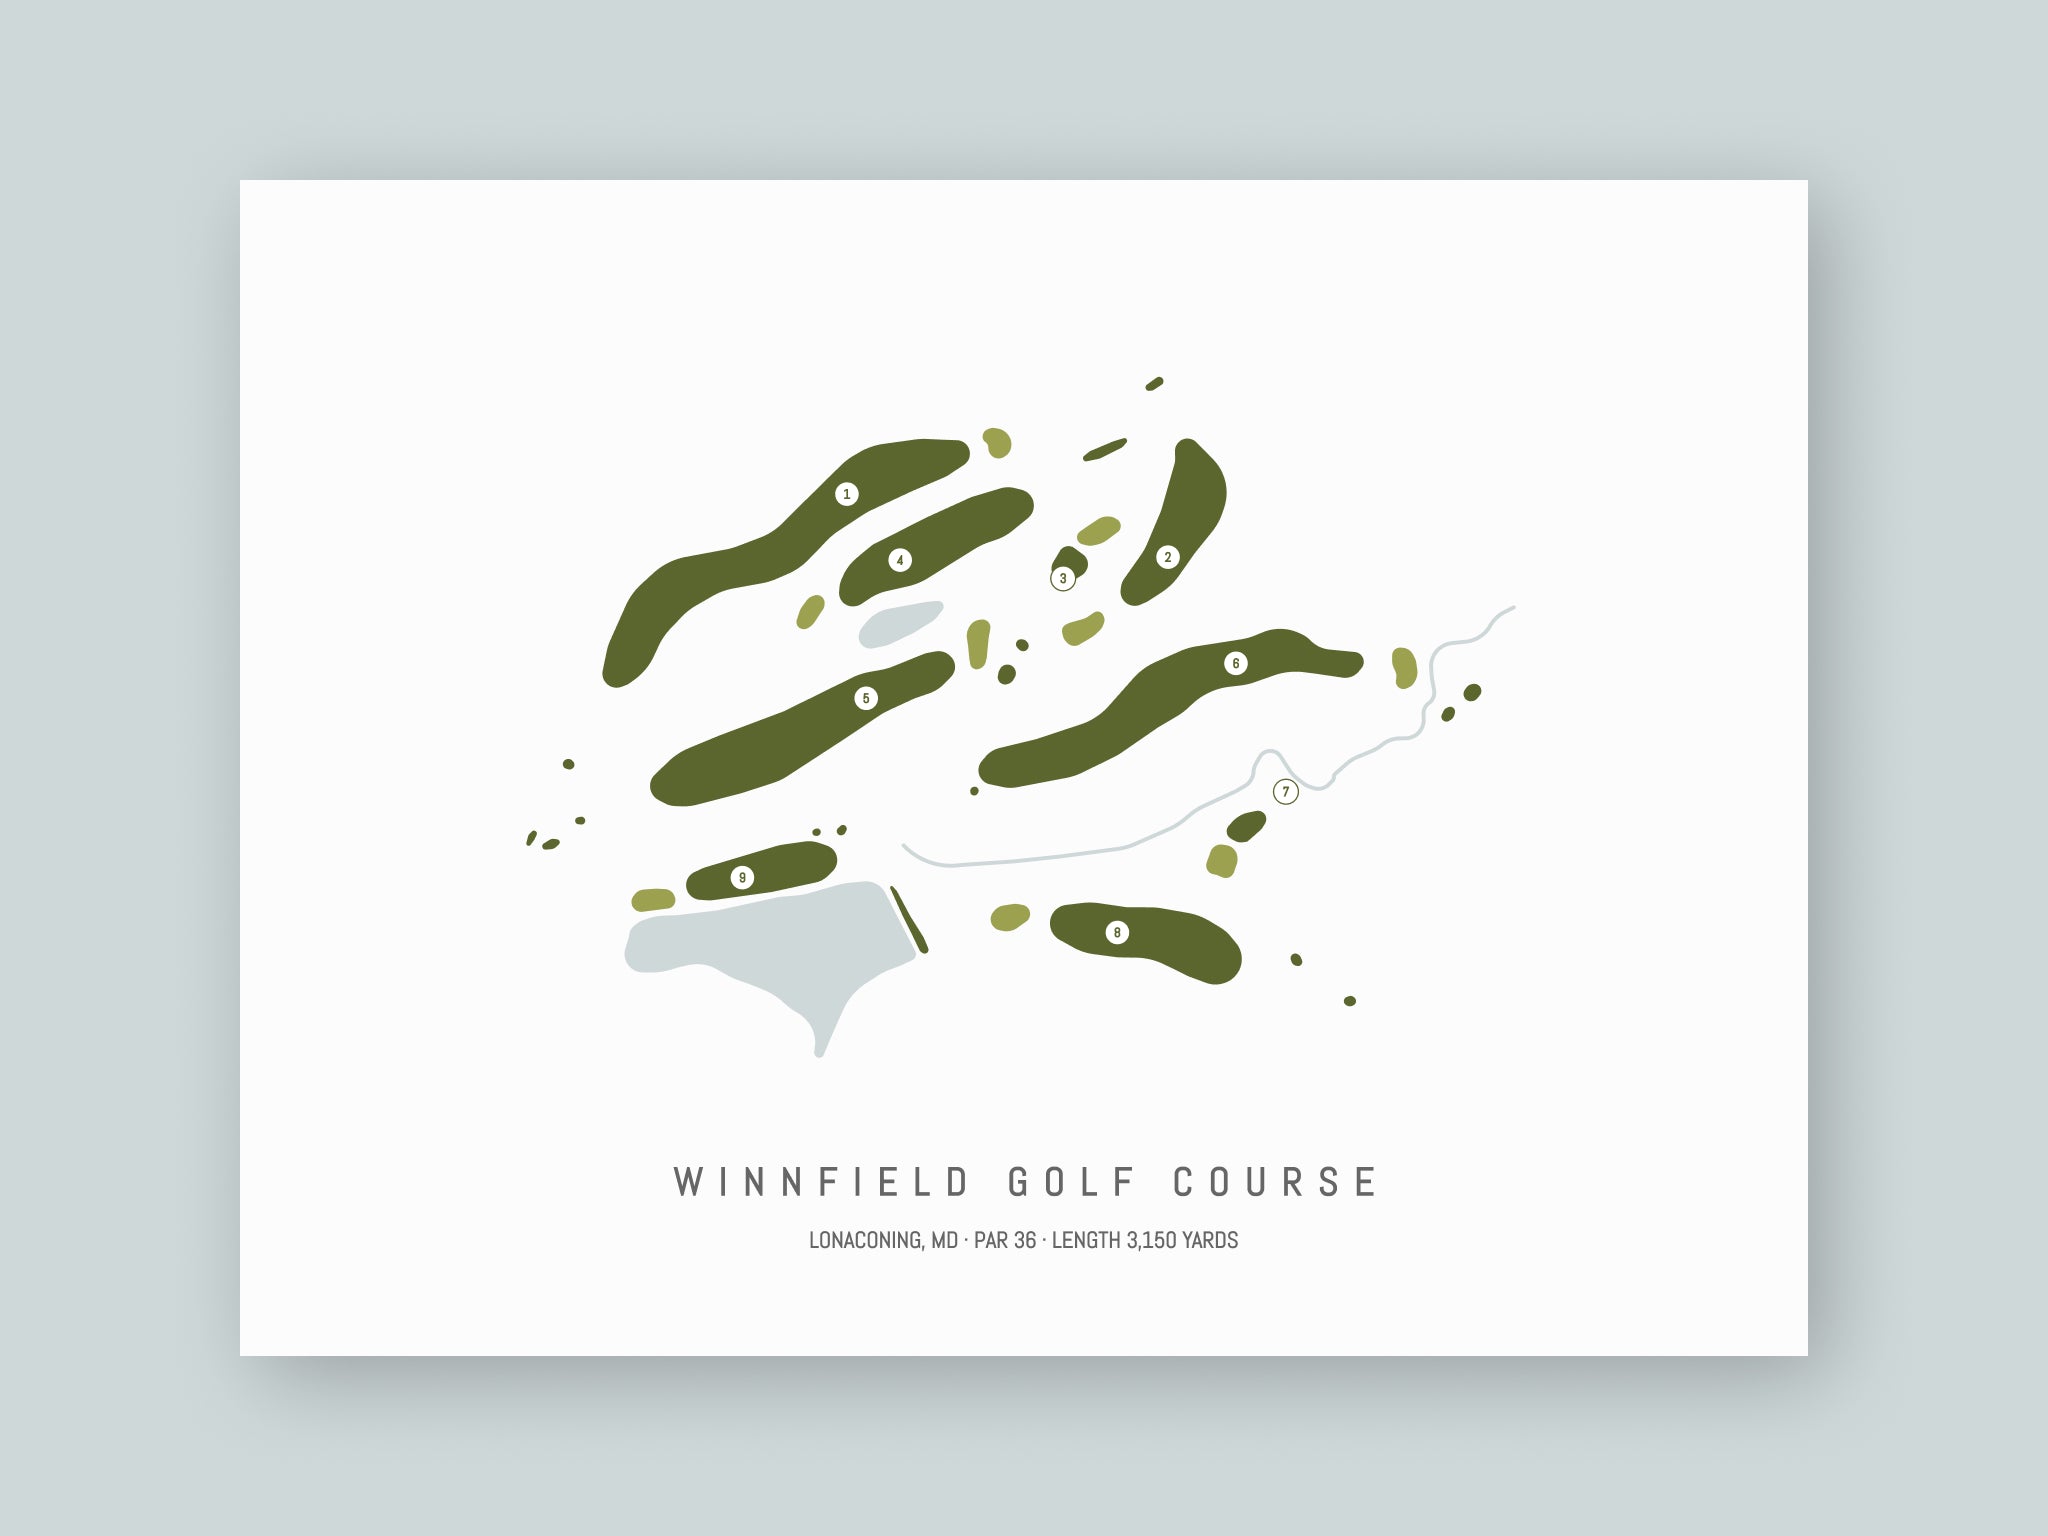 Winnfield-Golf-Course-MD--Unframed-24x18-With-Hole-Numbers